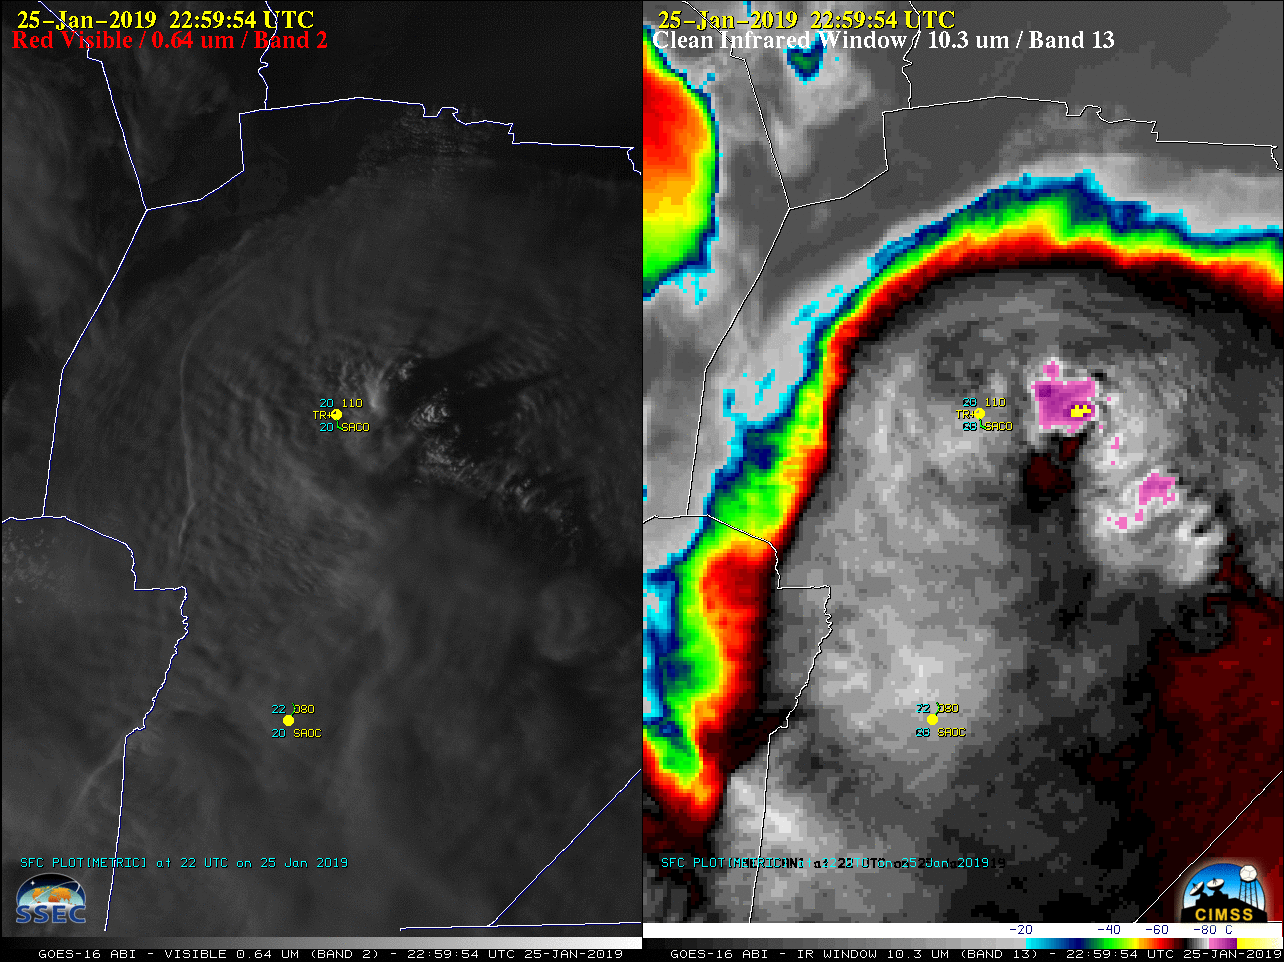 GOES-16 "Red" Visible (0.64 µm, left) and "Clean" Infrared Window (10.3 µm, right) images [click to play MP4 animation]